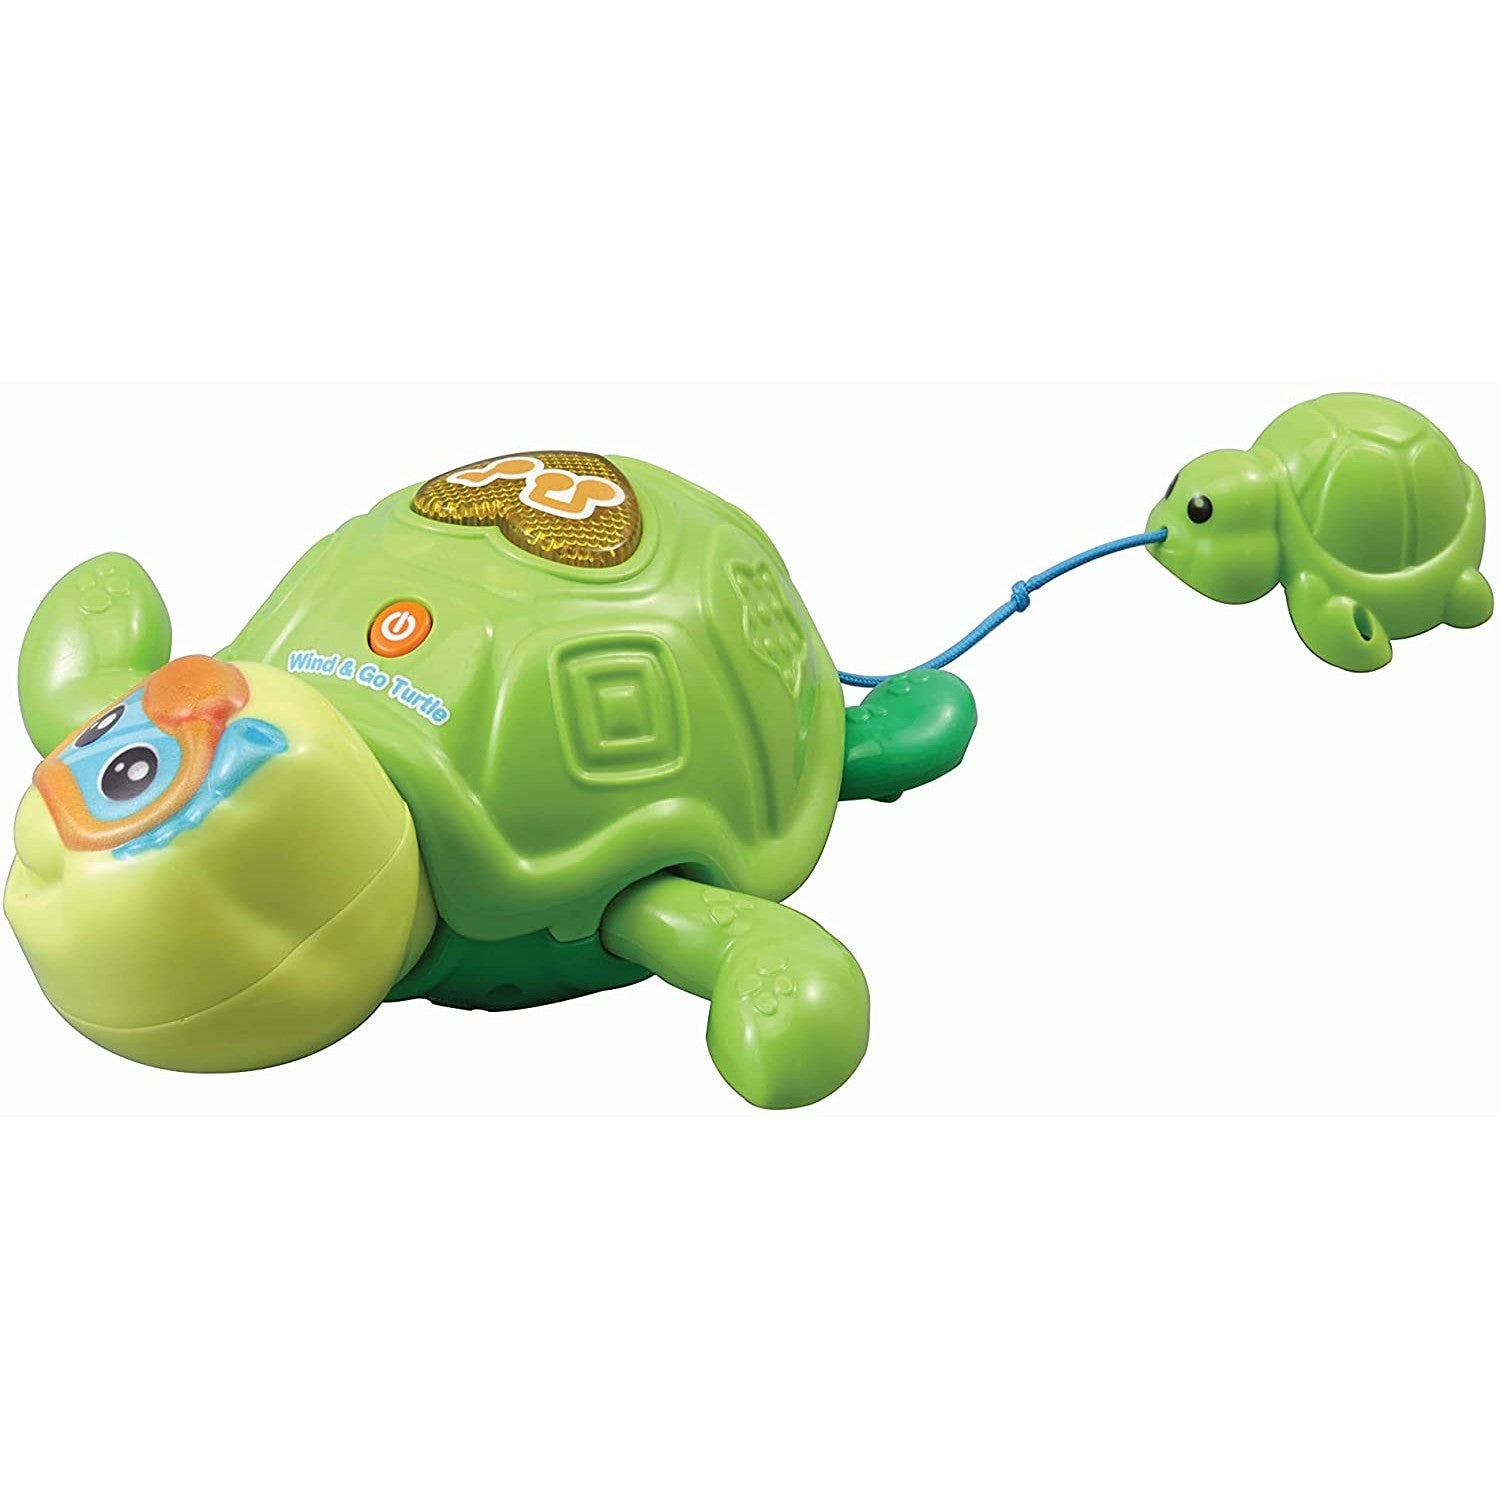 Wind & Go Turtle Baby Bath Interactive Learning Toy